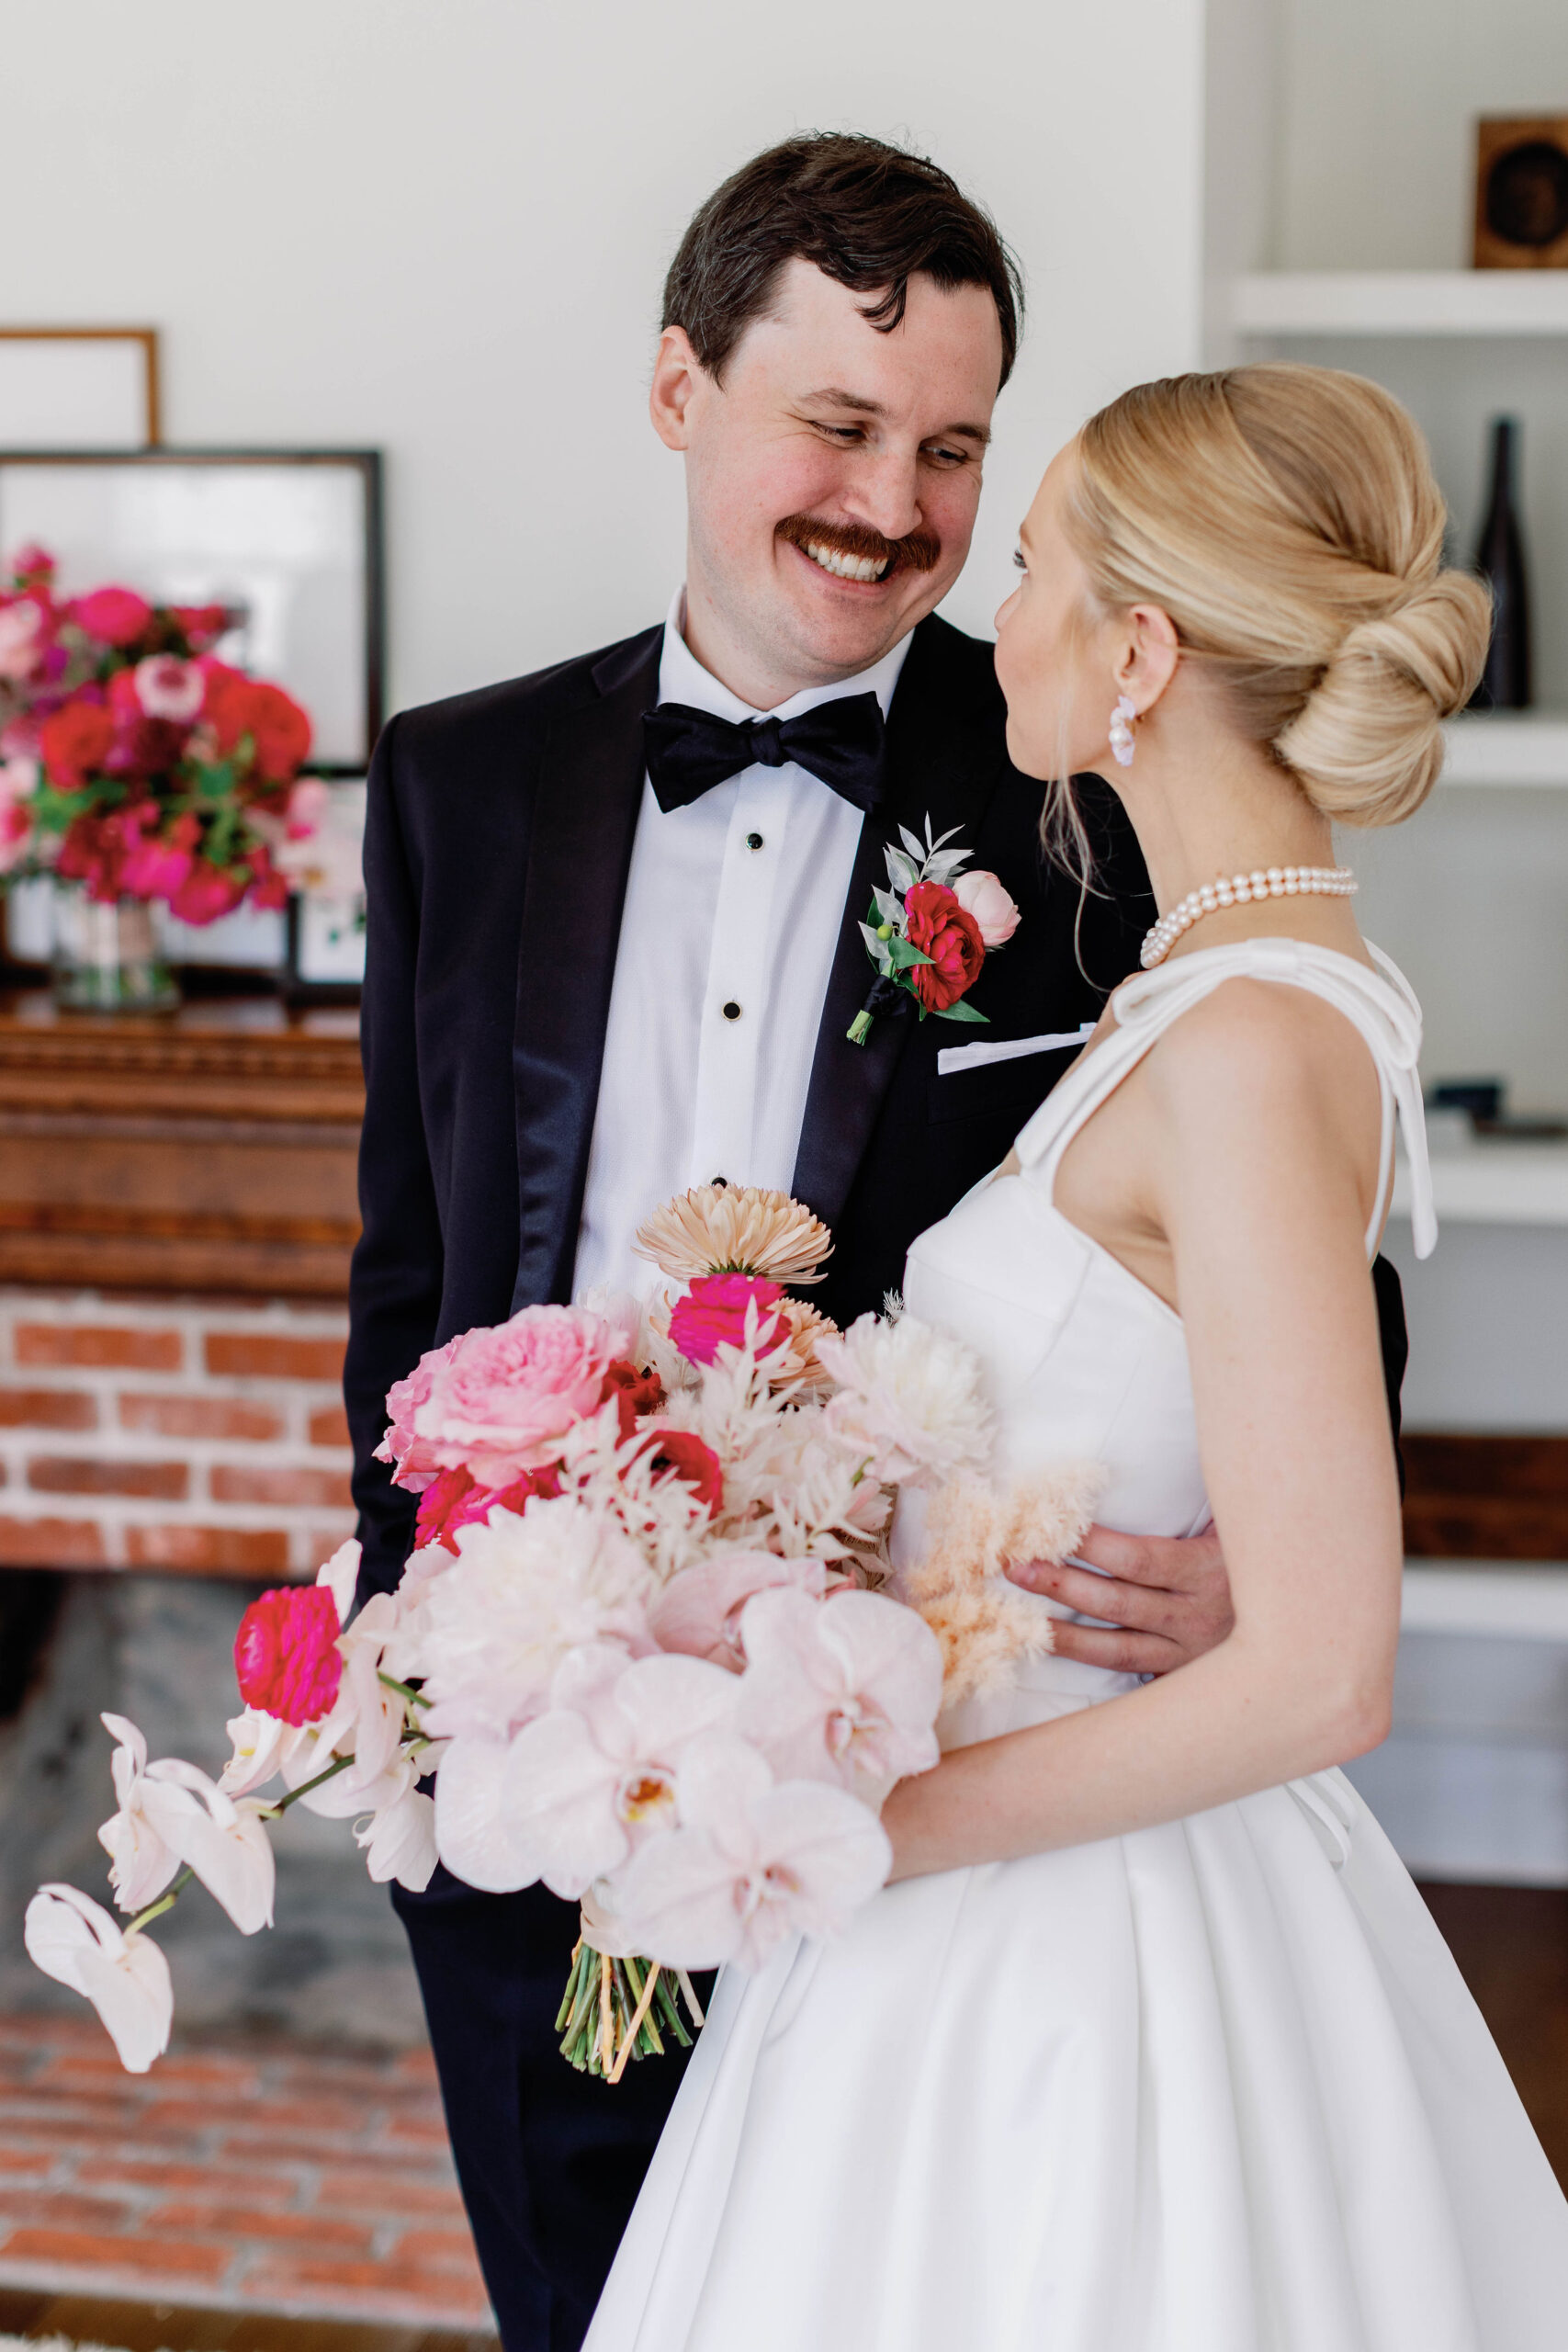 Bride and Groom together standing with wedding bouquet after first look. | Photo by Sarah of Sarah Block Photography